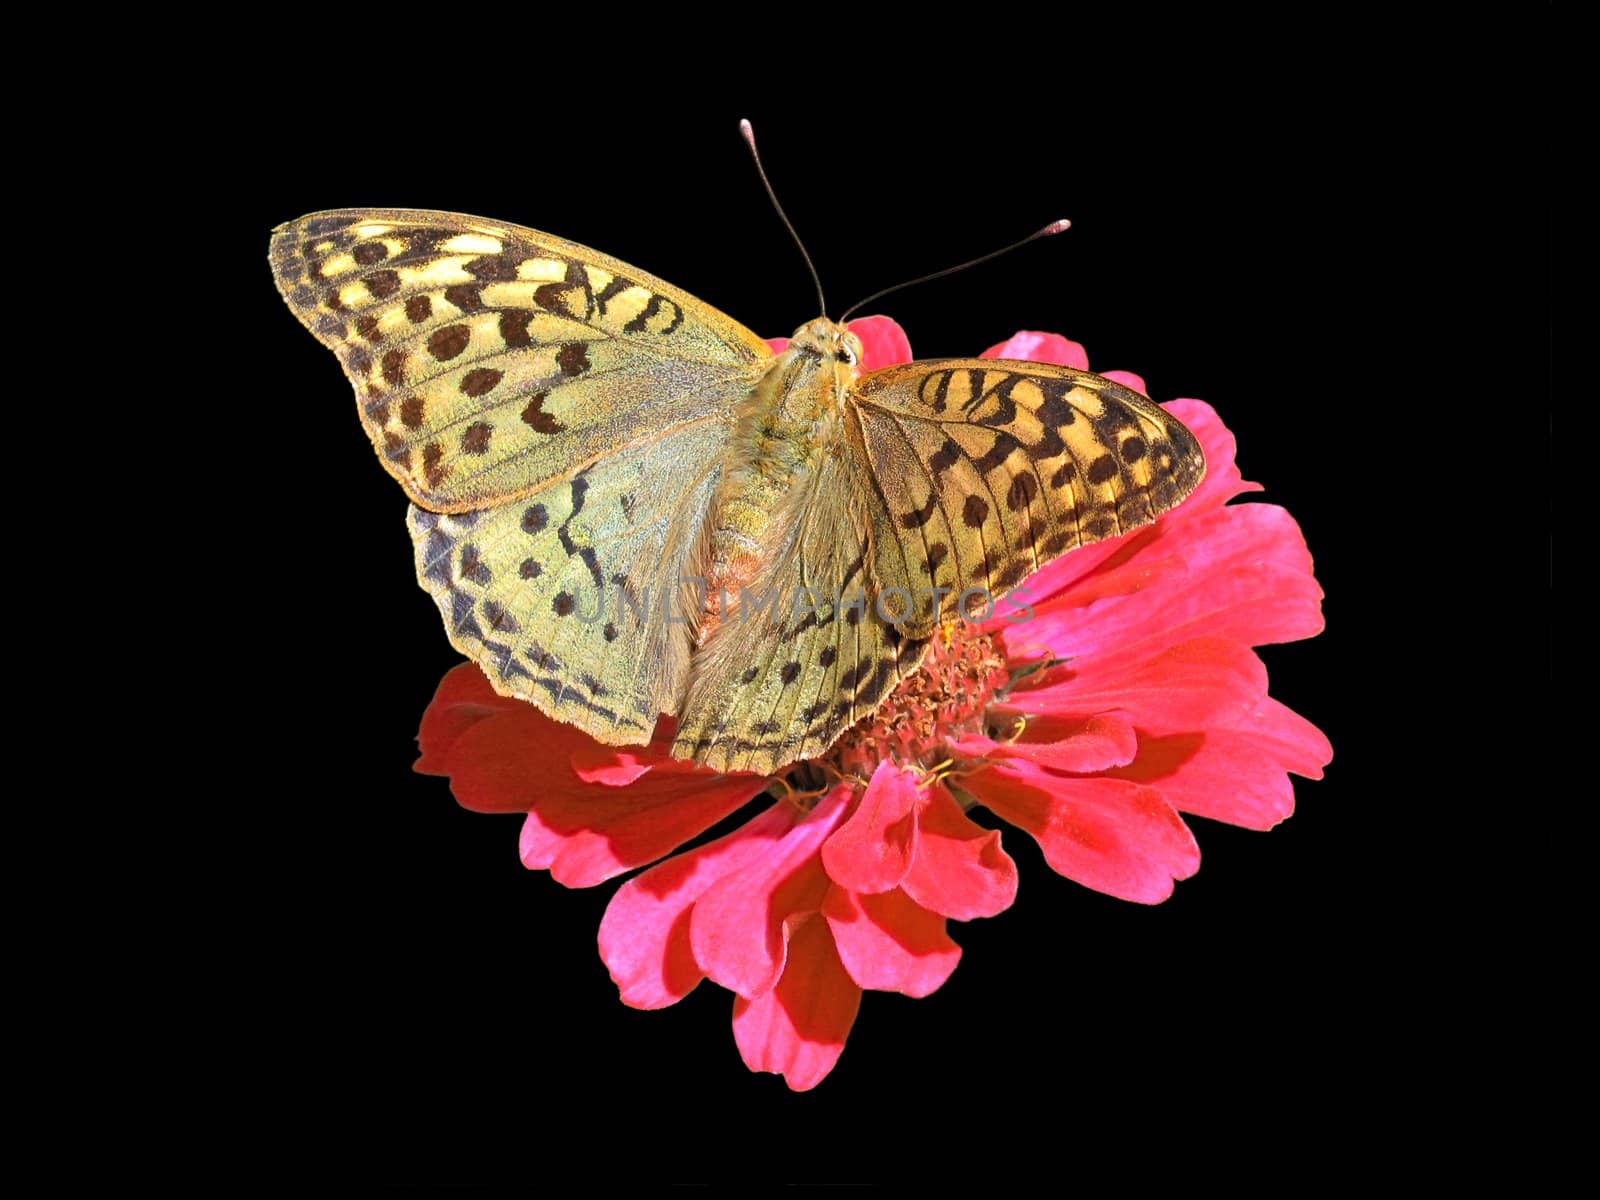 butterfly (Silver-washed Fritillary) on flower (zinnia) over black